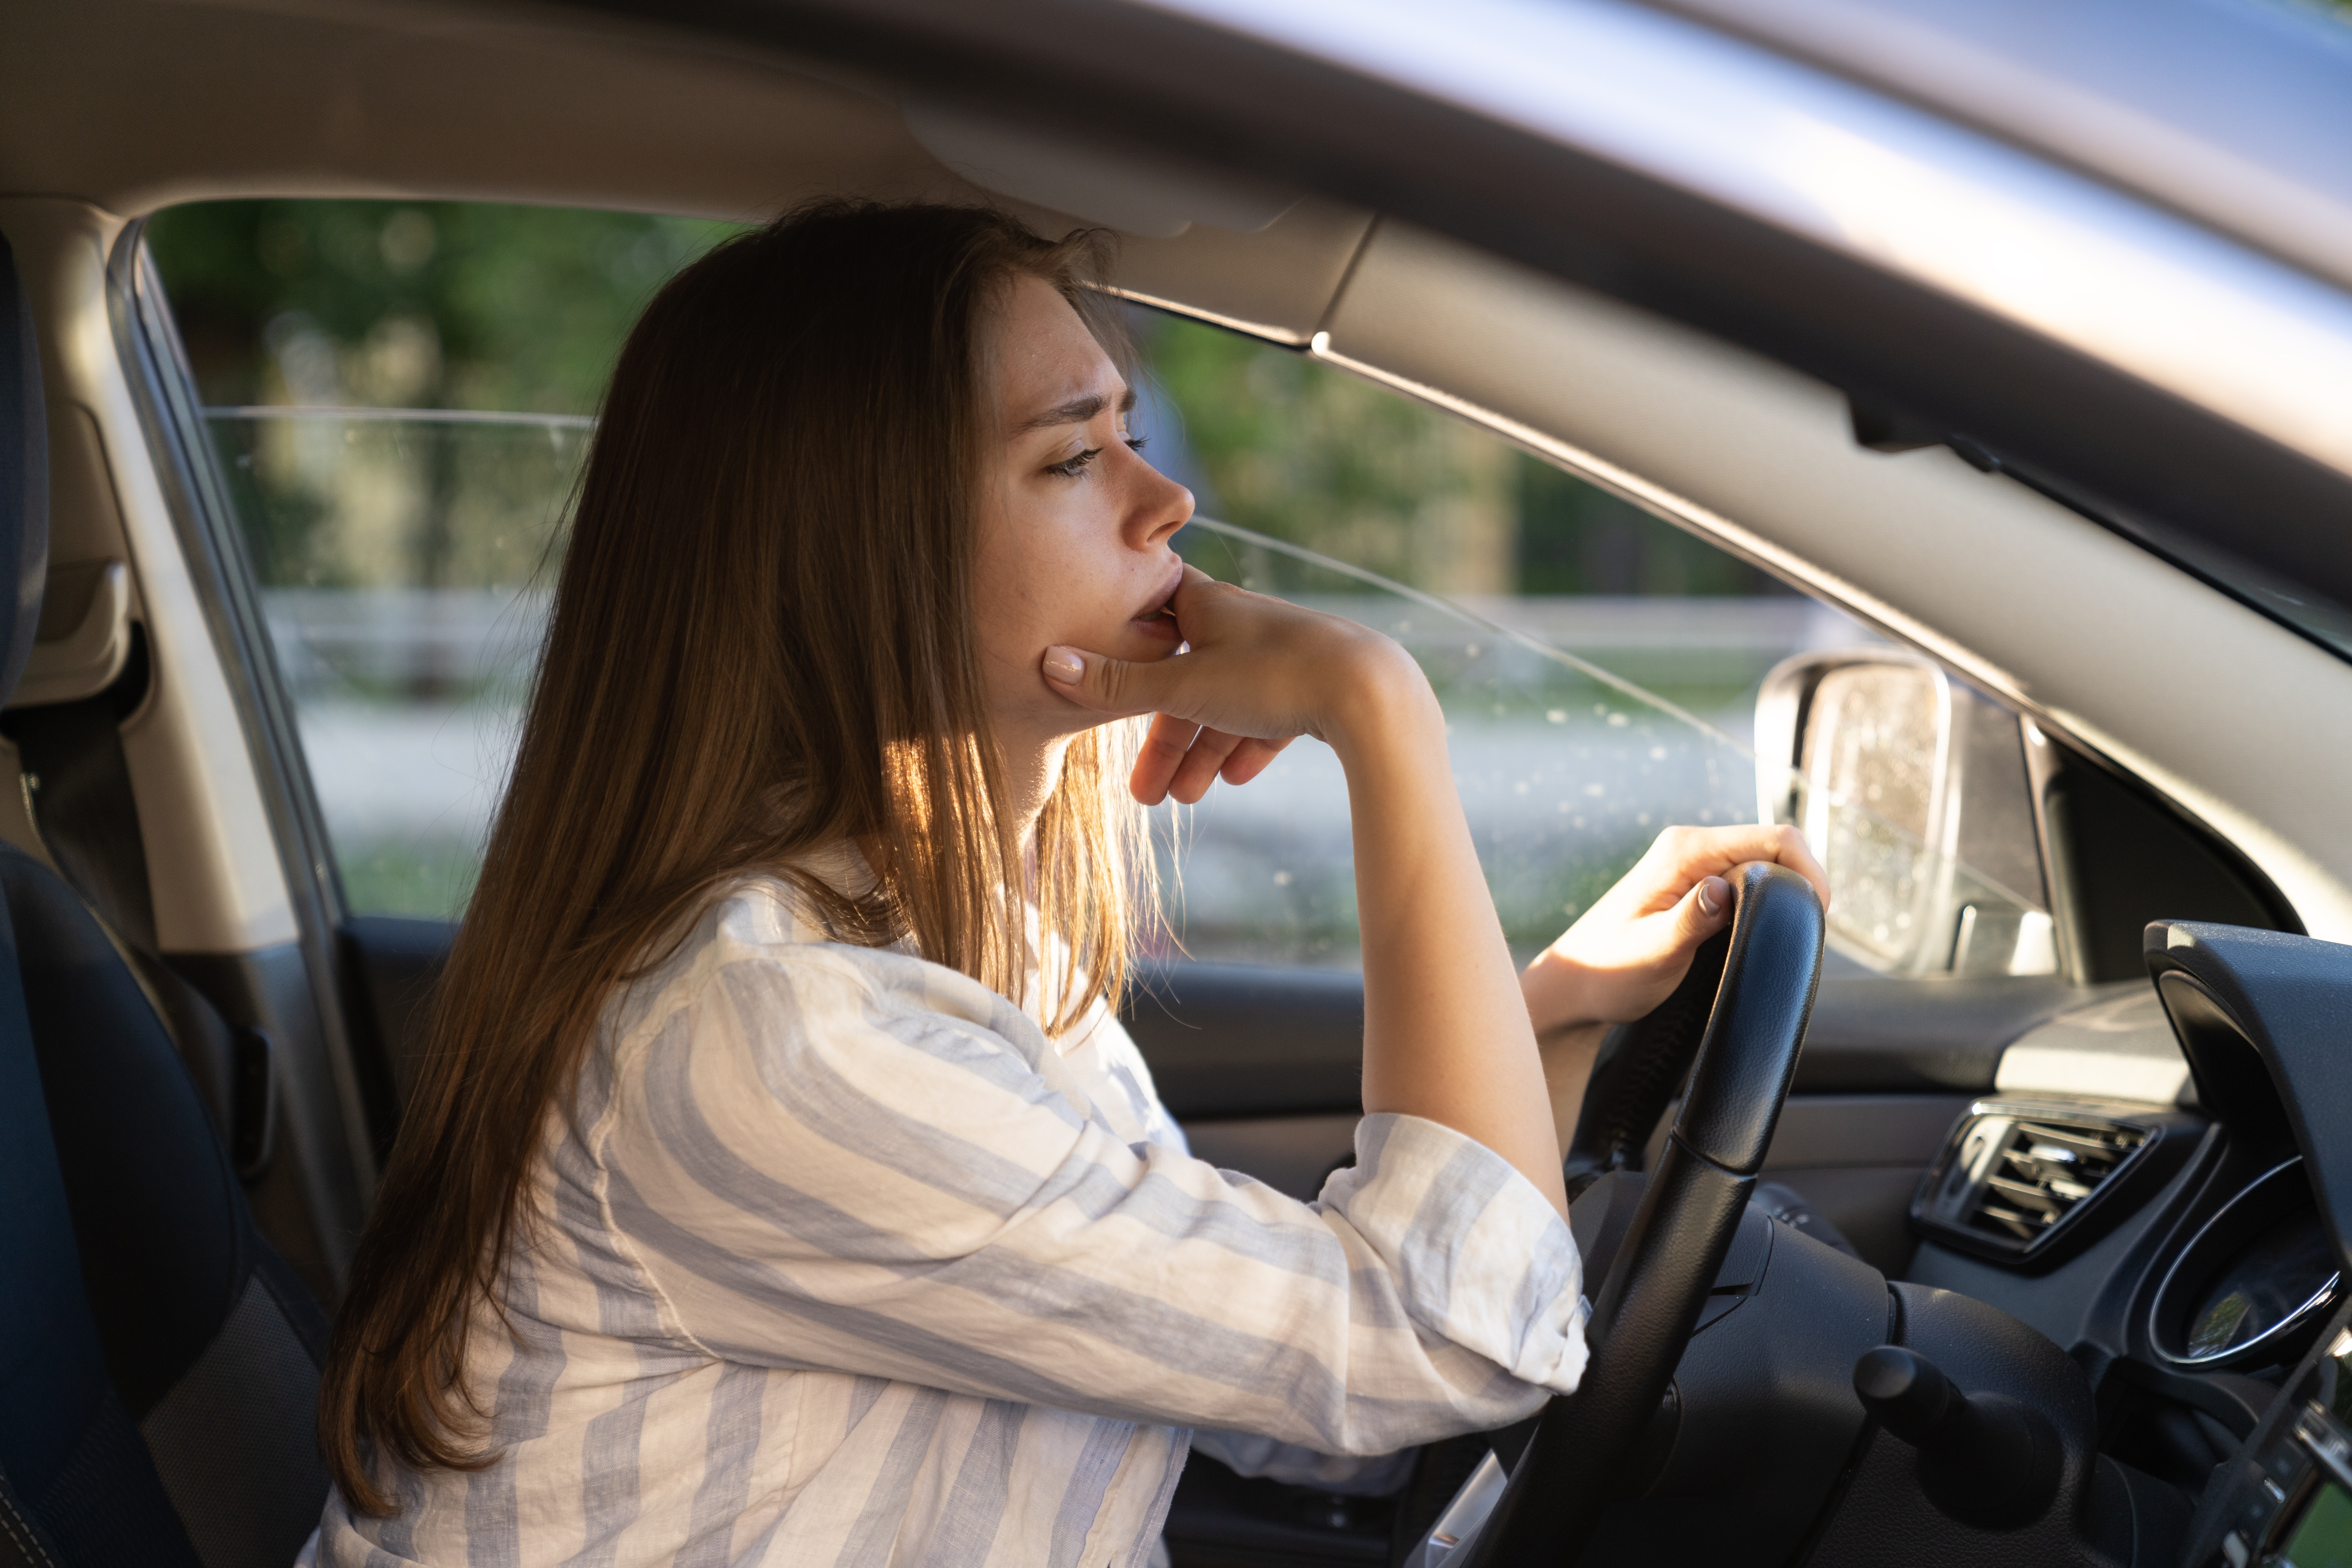 A young woman lost in her thoughts while driving | Source: Shutterstock